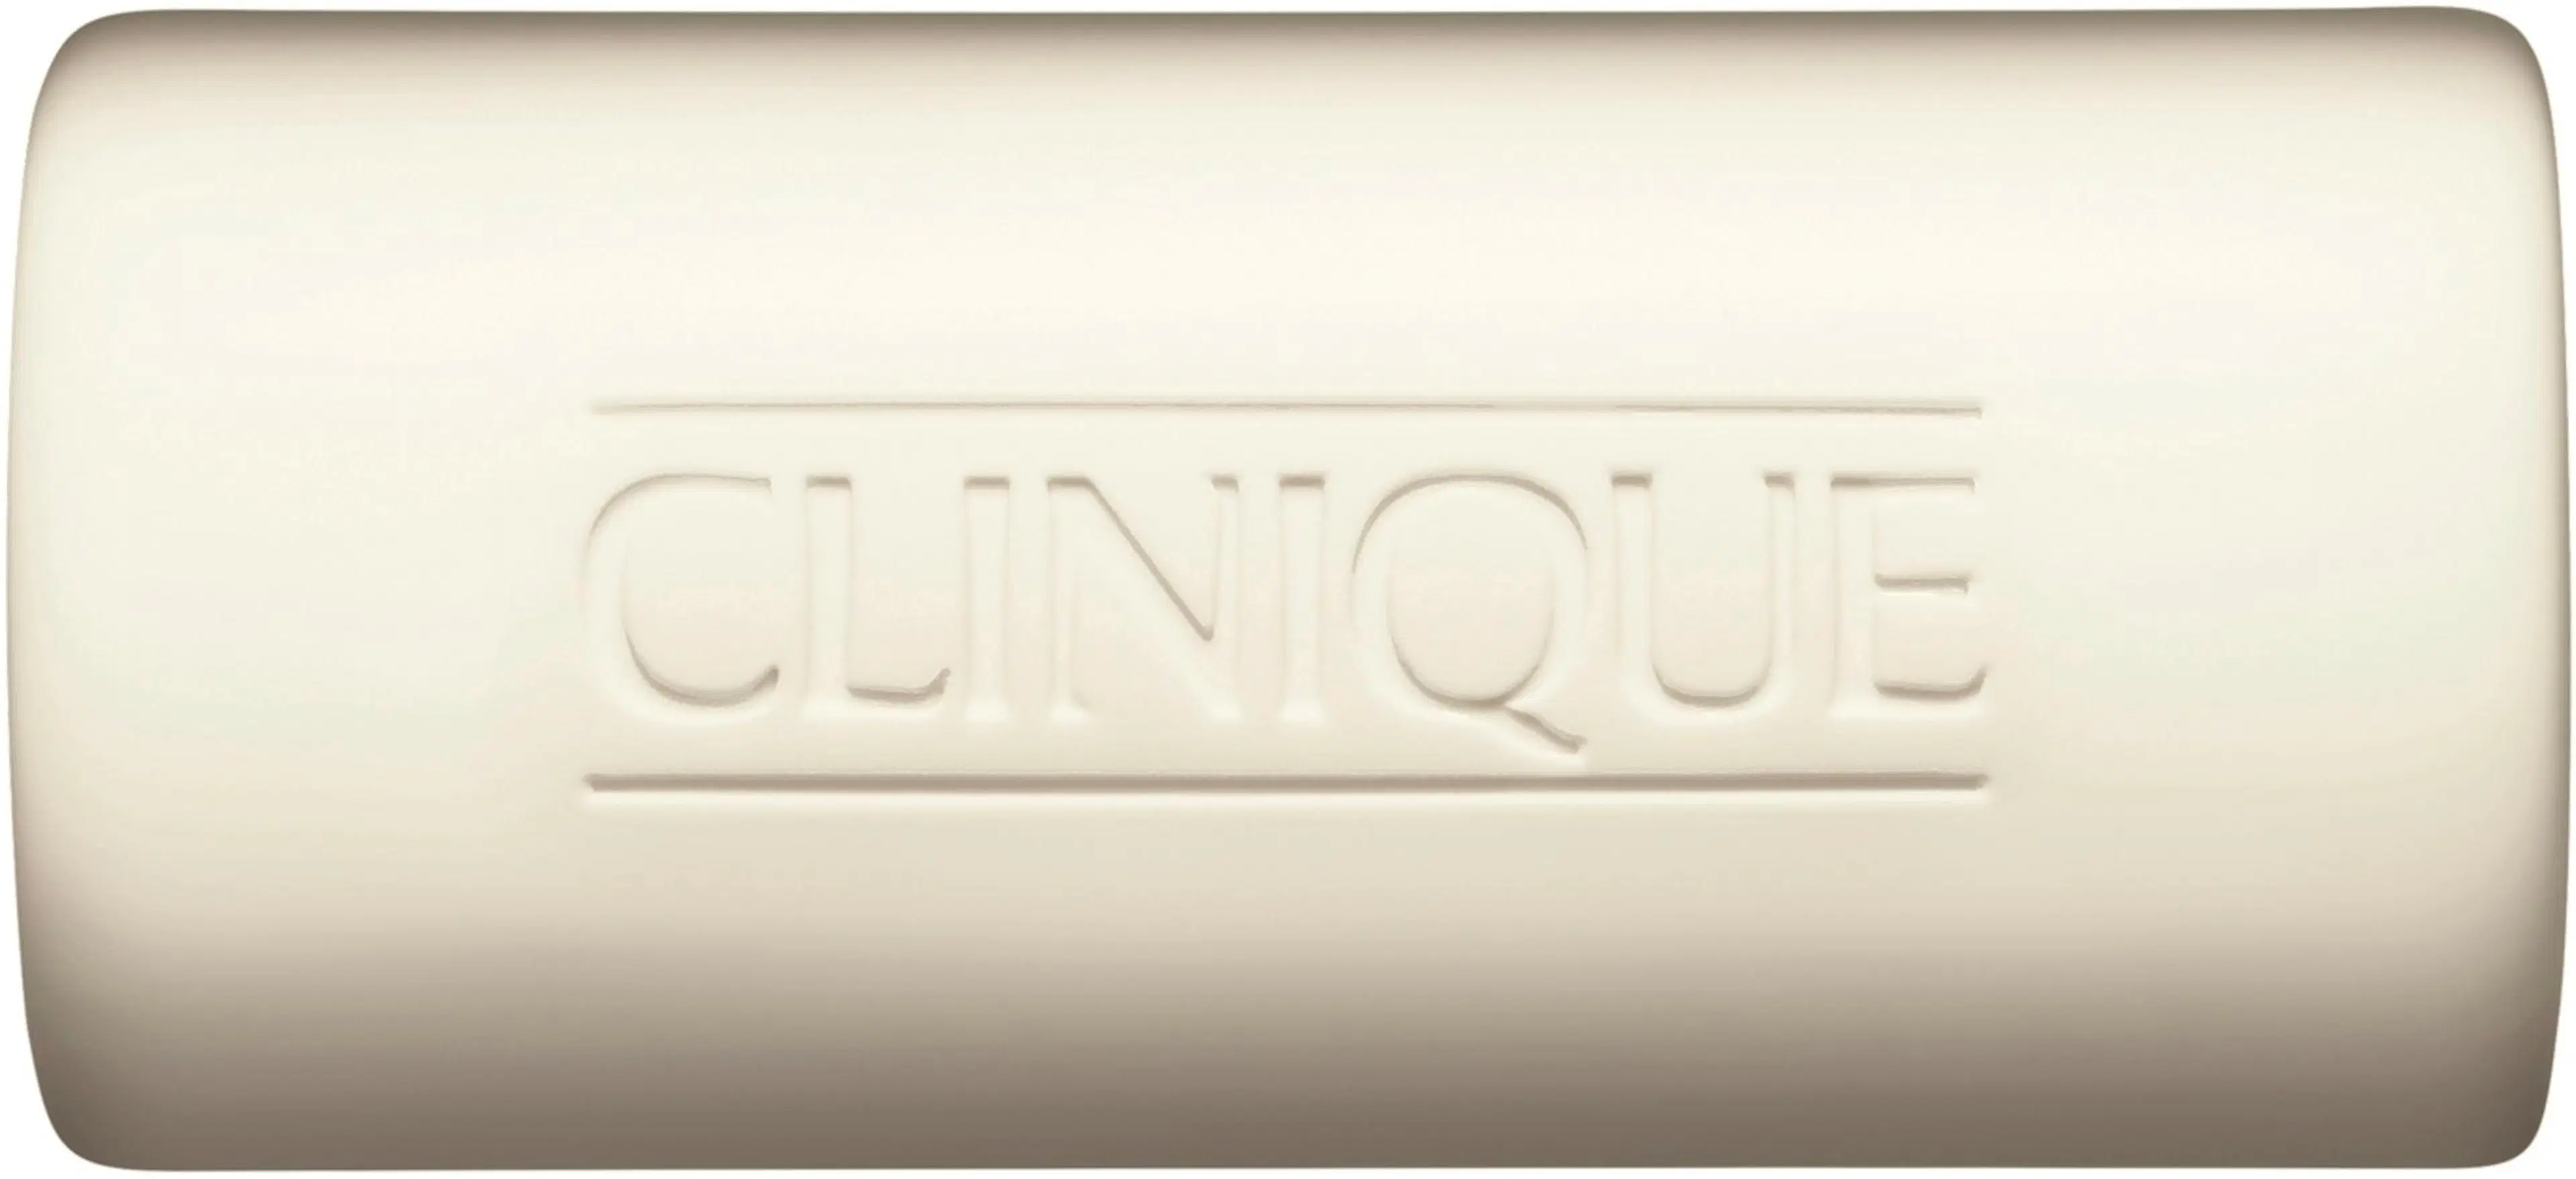 Clinique Anti-Blemish Solutions Cleansing Bar For Face & Body kasvosaippua 150 g